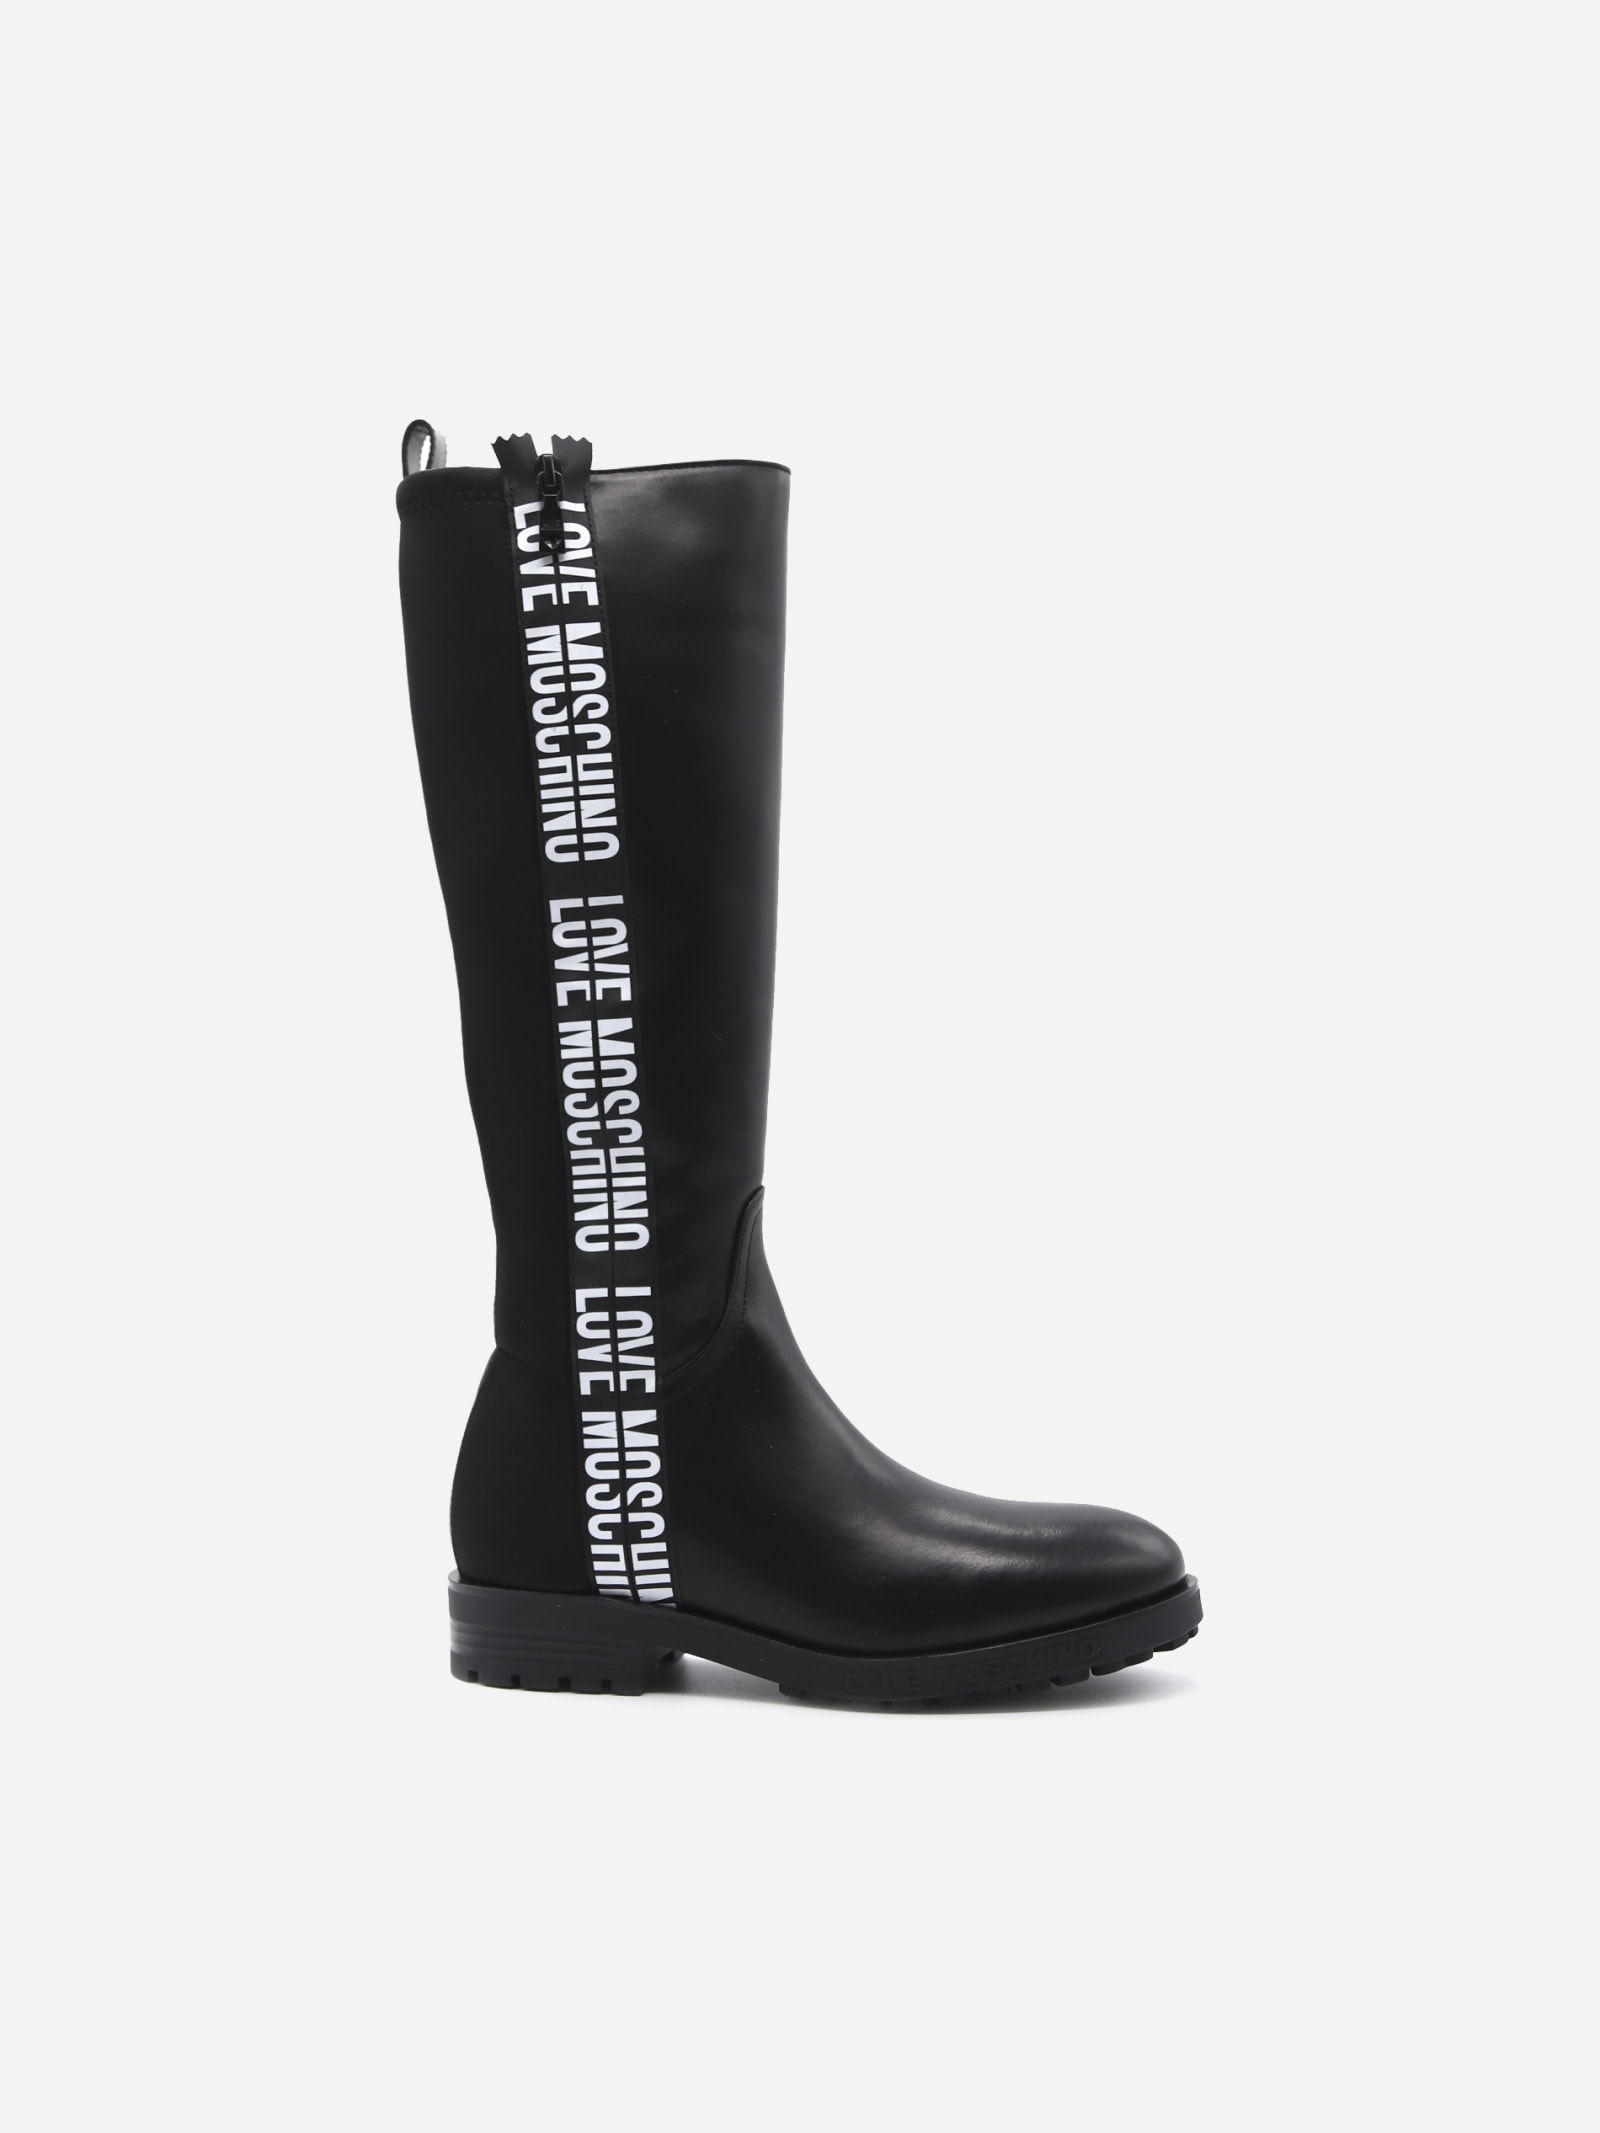 Buy Love Moschino Leather Boots With Contrasting Logo Band online, shop Love Moschino shoes with free shipping